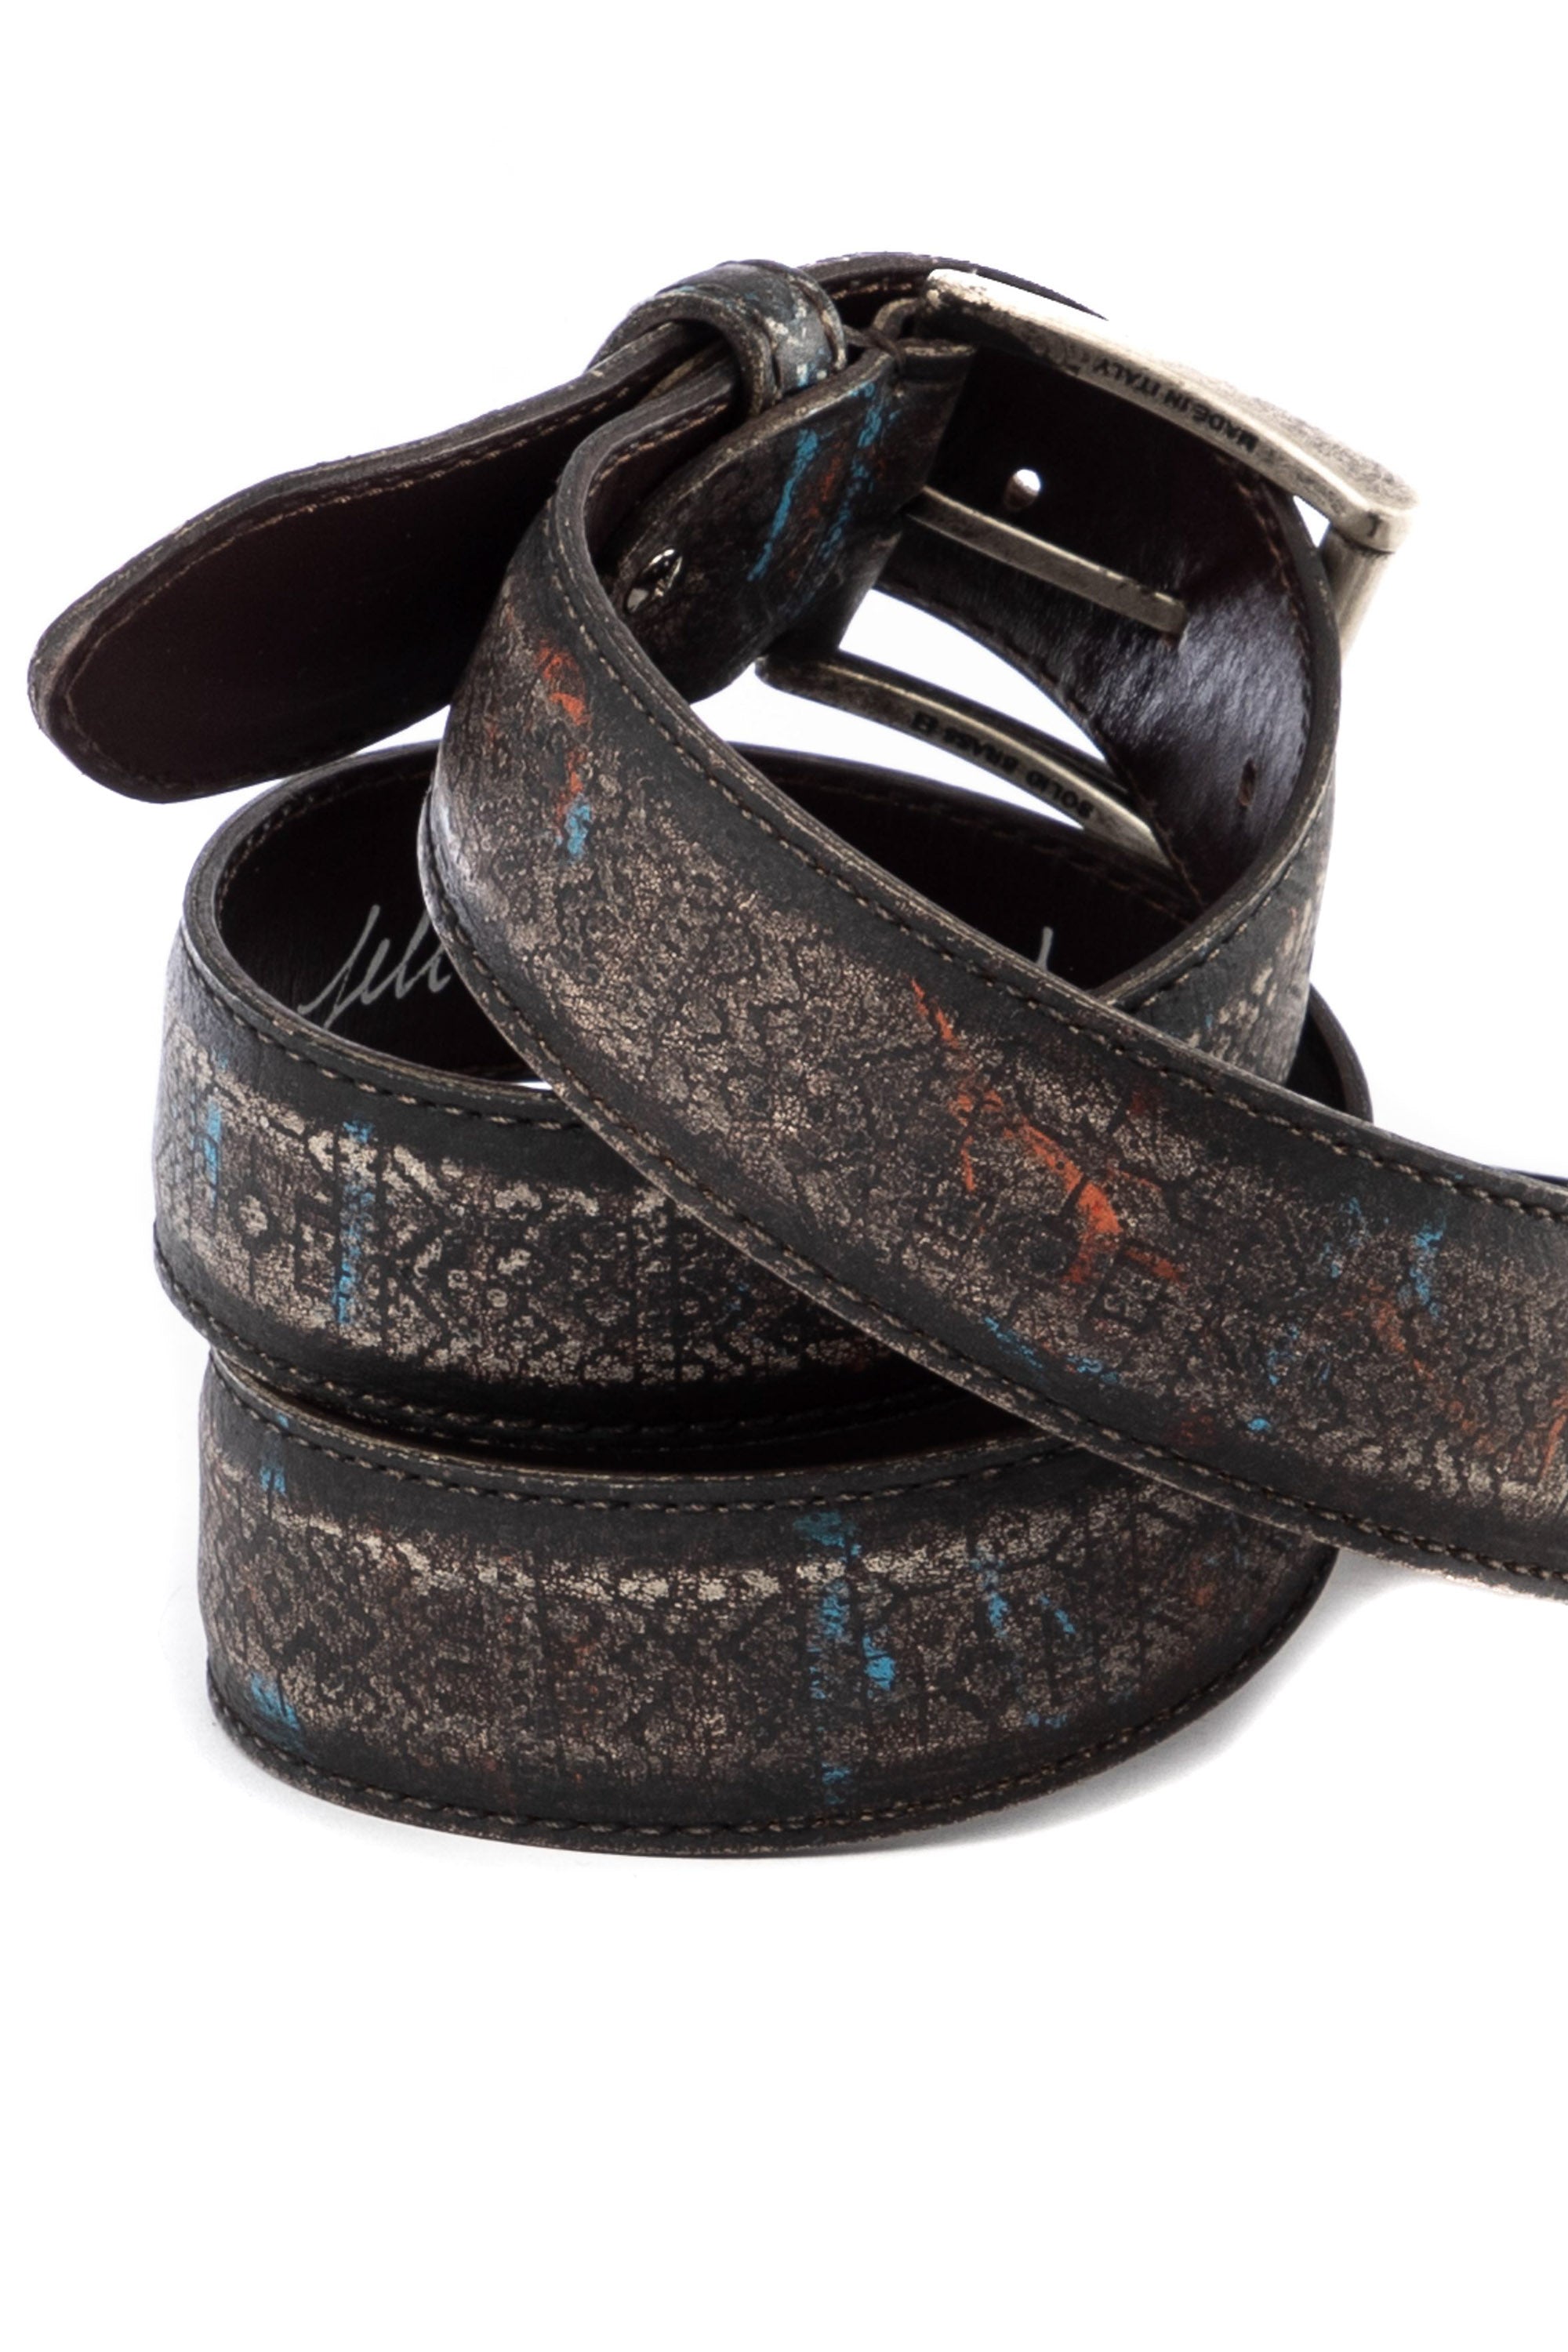 Handcrafted belt in dark "impressions" leather